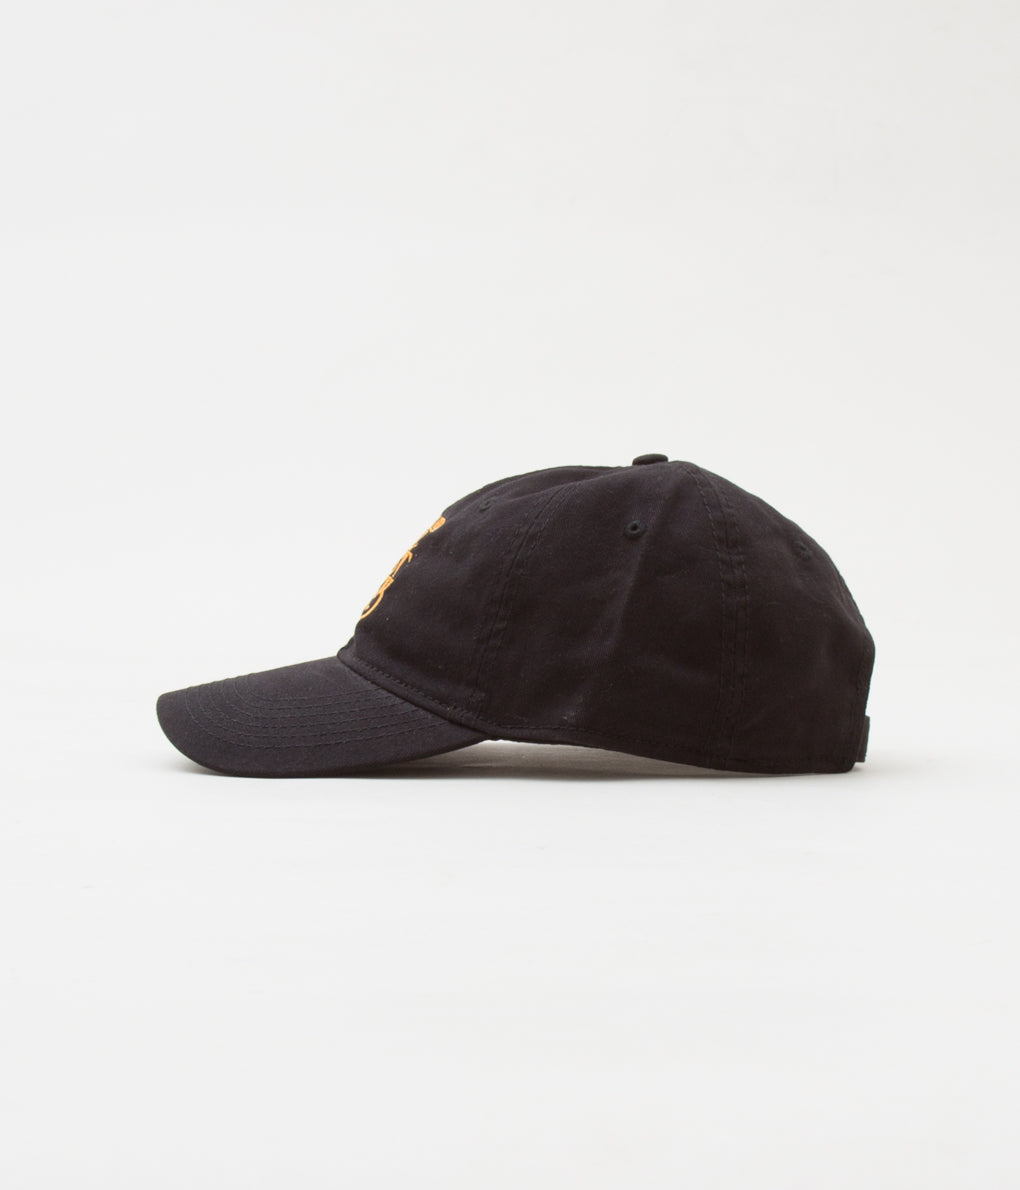 BLUESCENTRIC "THE BAND THE LAST WALTZ HAT"(BLACK)